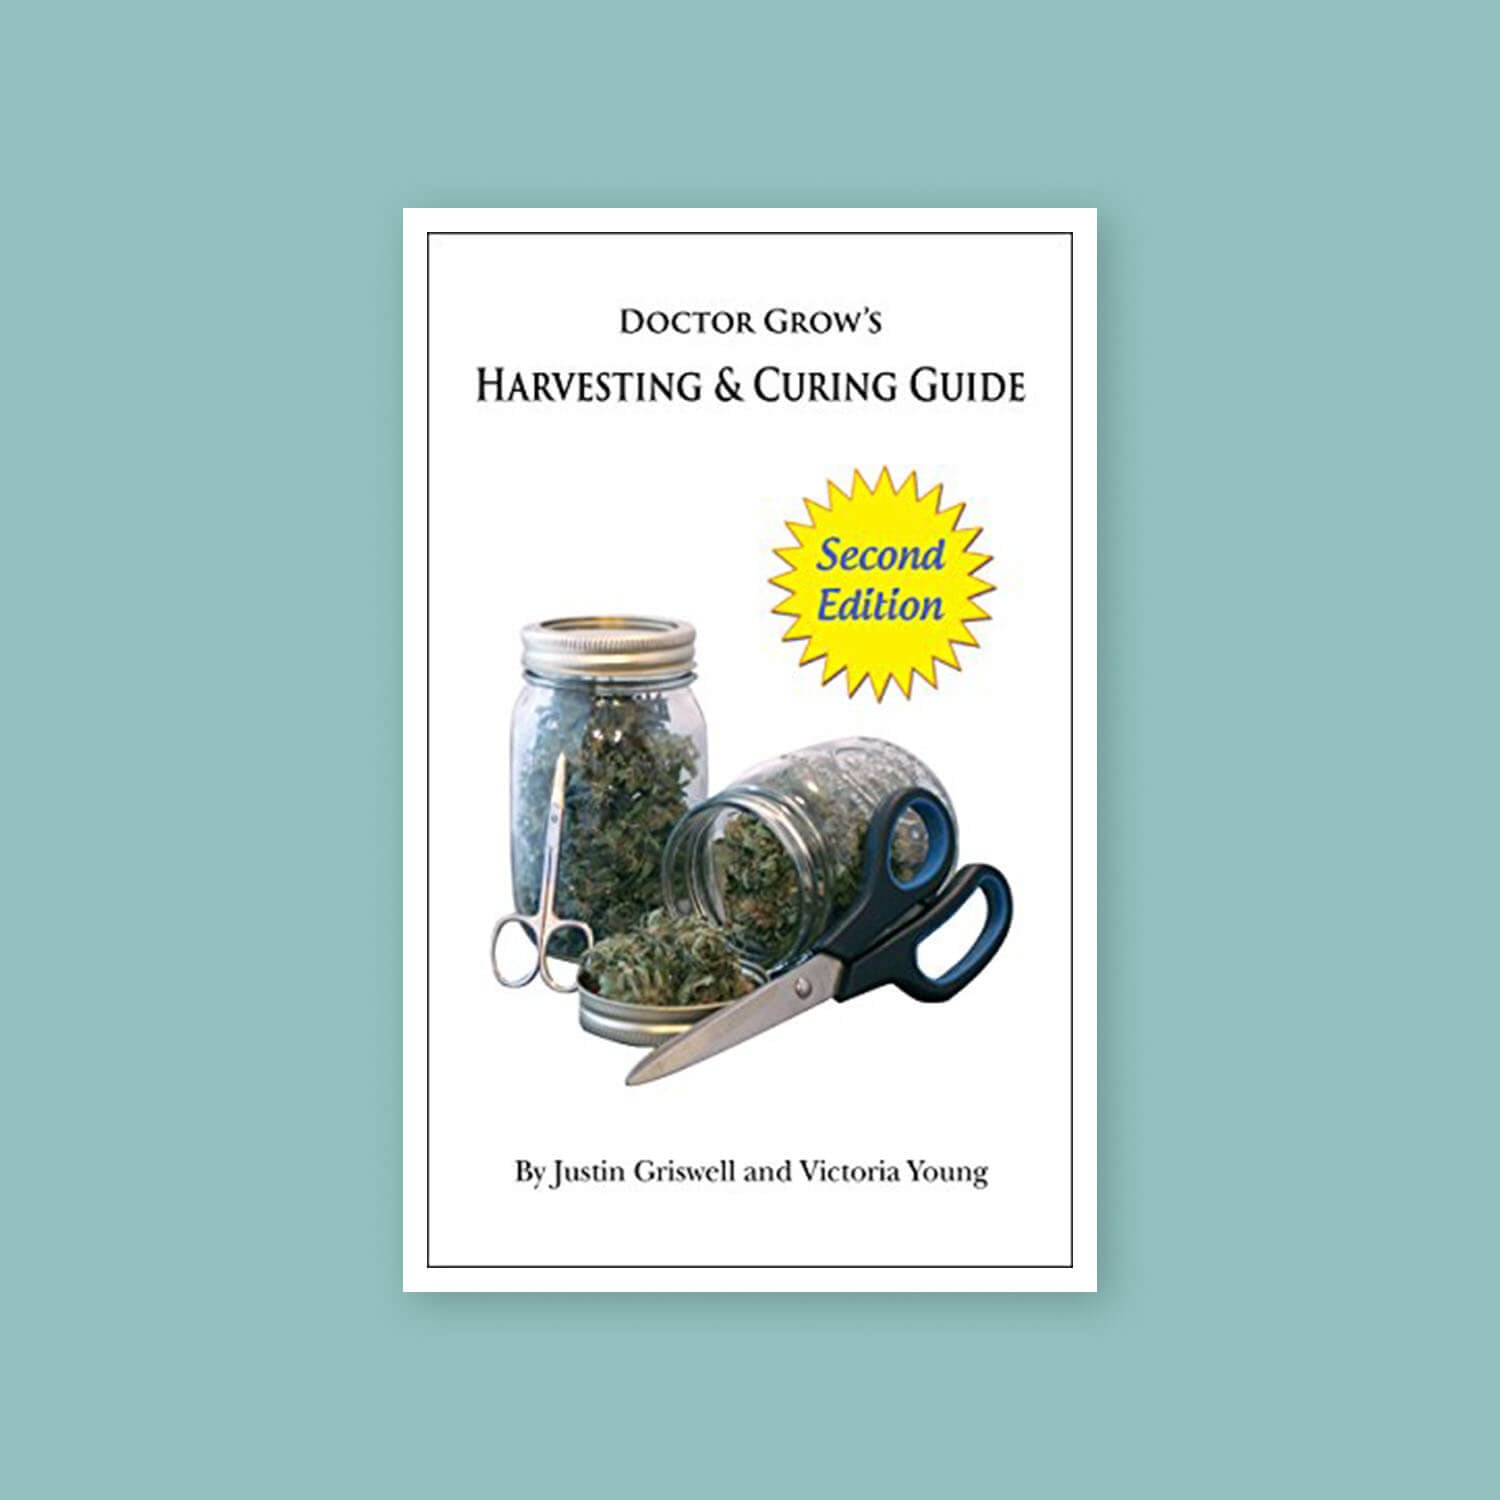 Doctor's harvesting and curing guide to cannabis - Goldleaf bookshelf